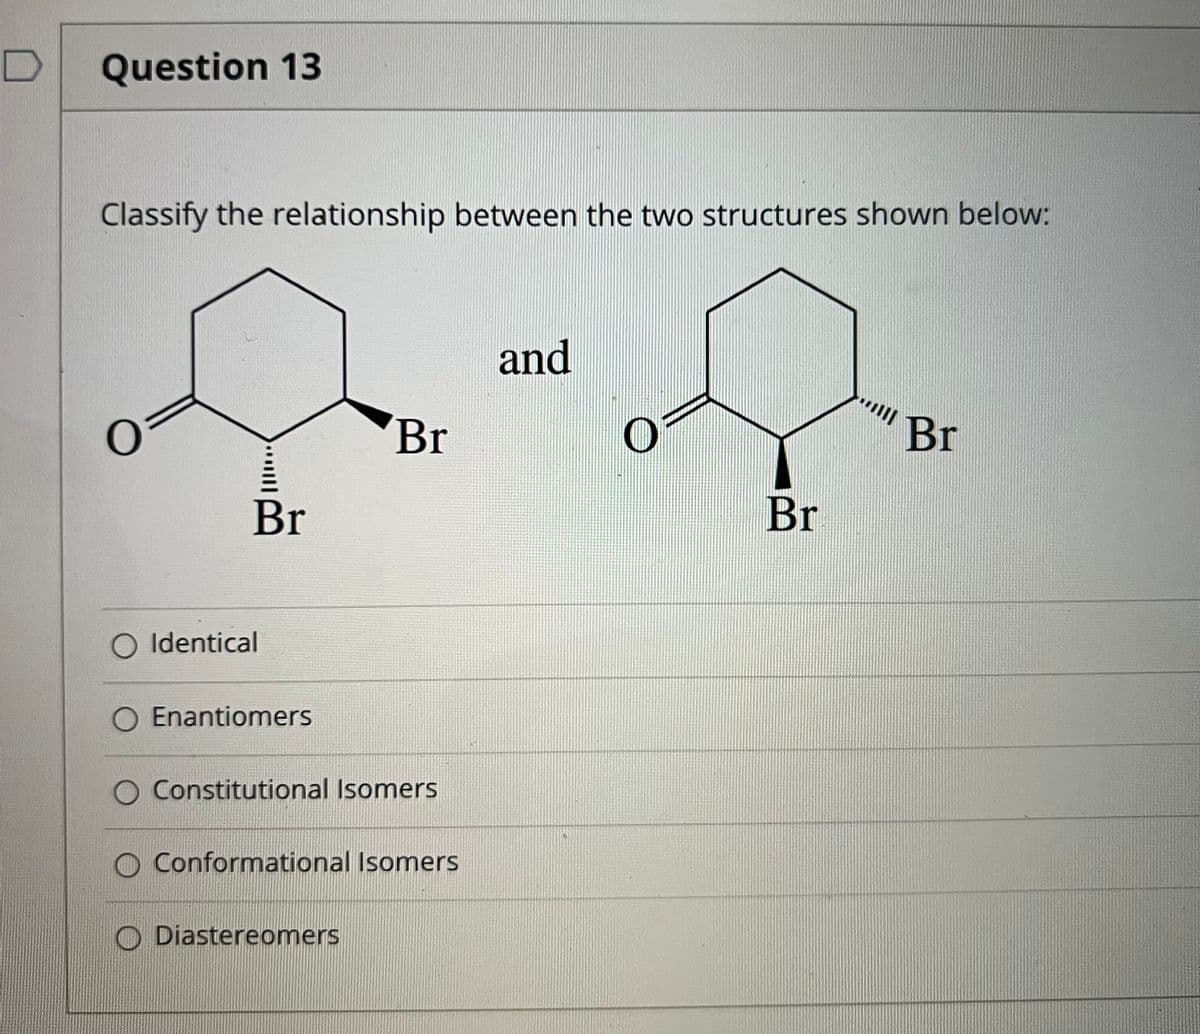 Question 13
Classify the relationship between the two structures shown below:
and
Br
Br
Br
Br
O Identical
Enantiomers
Constitutional Isomers
O Conformational Isomers
O Diastereomers
